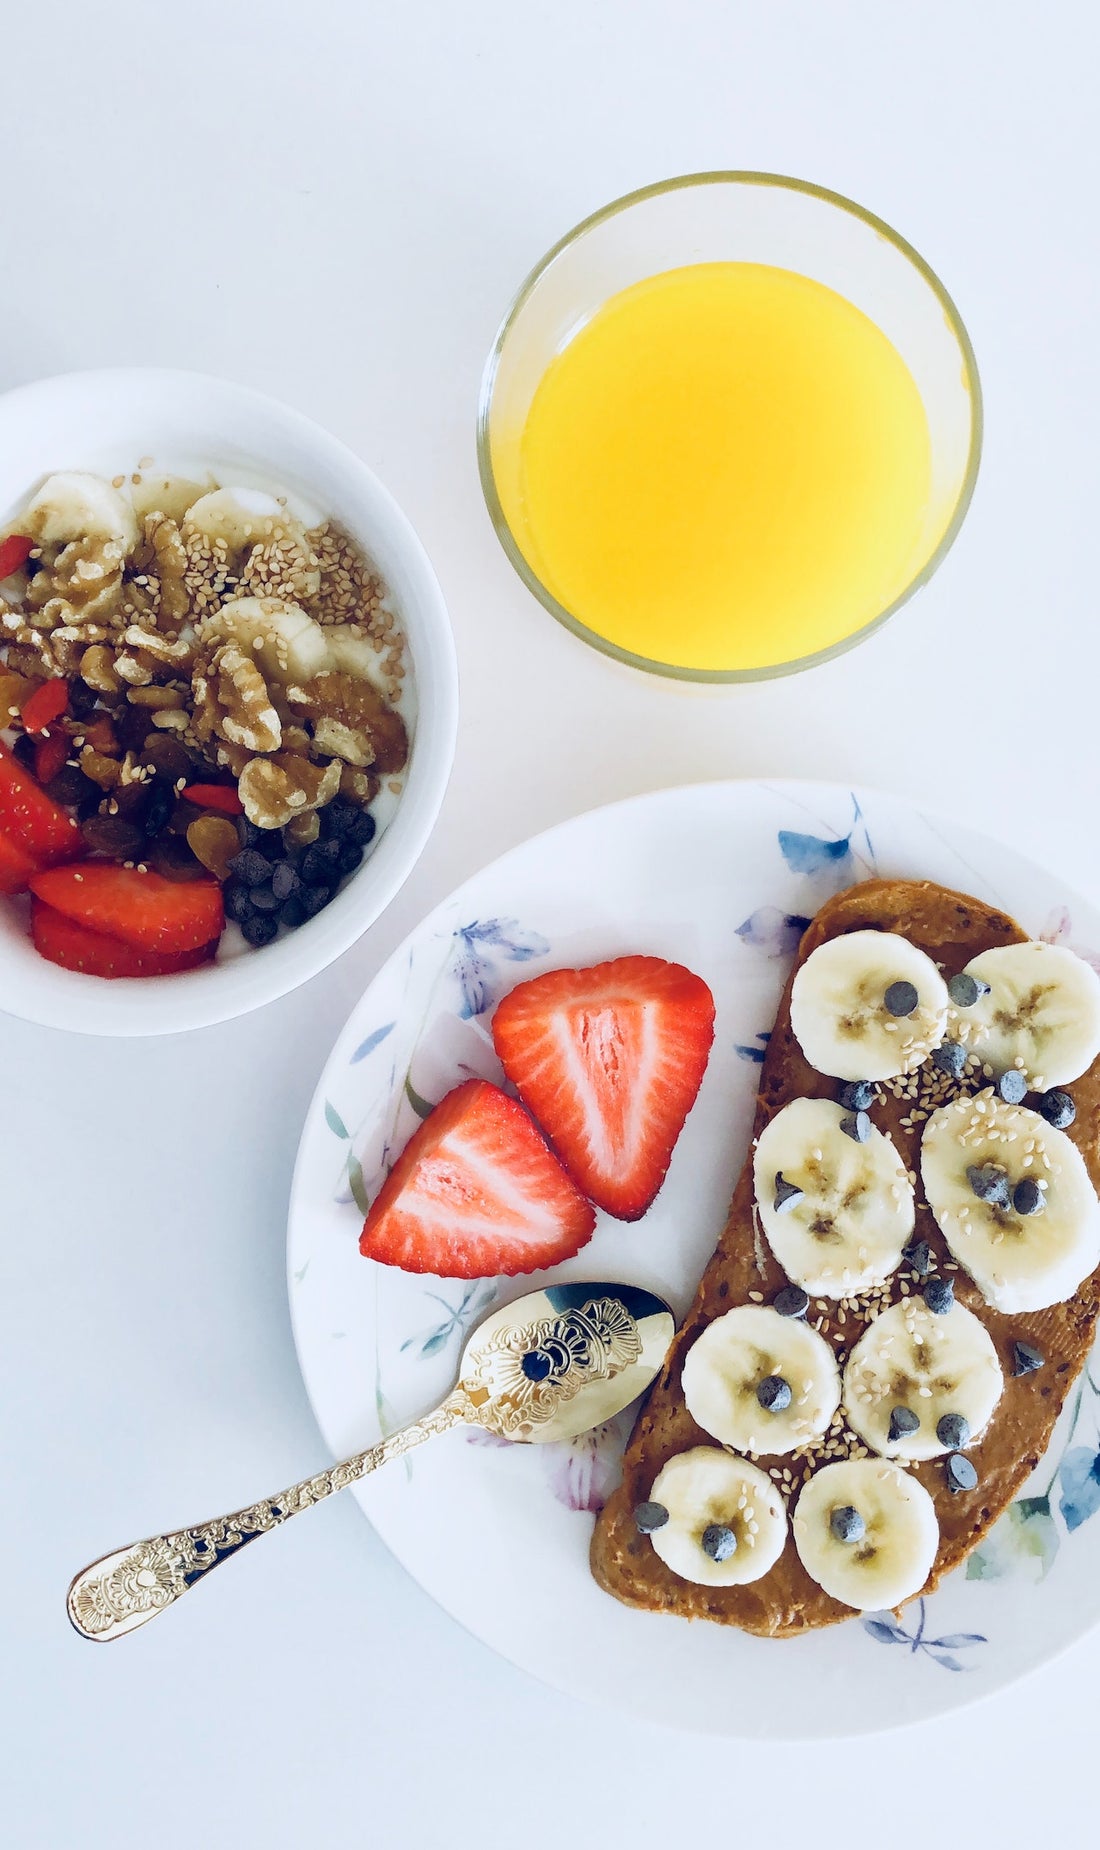 bananas-on-toast-with-bowl-of-porridge-oats-fresh-fruit-and-nuts-with-oj-bon-and-bear